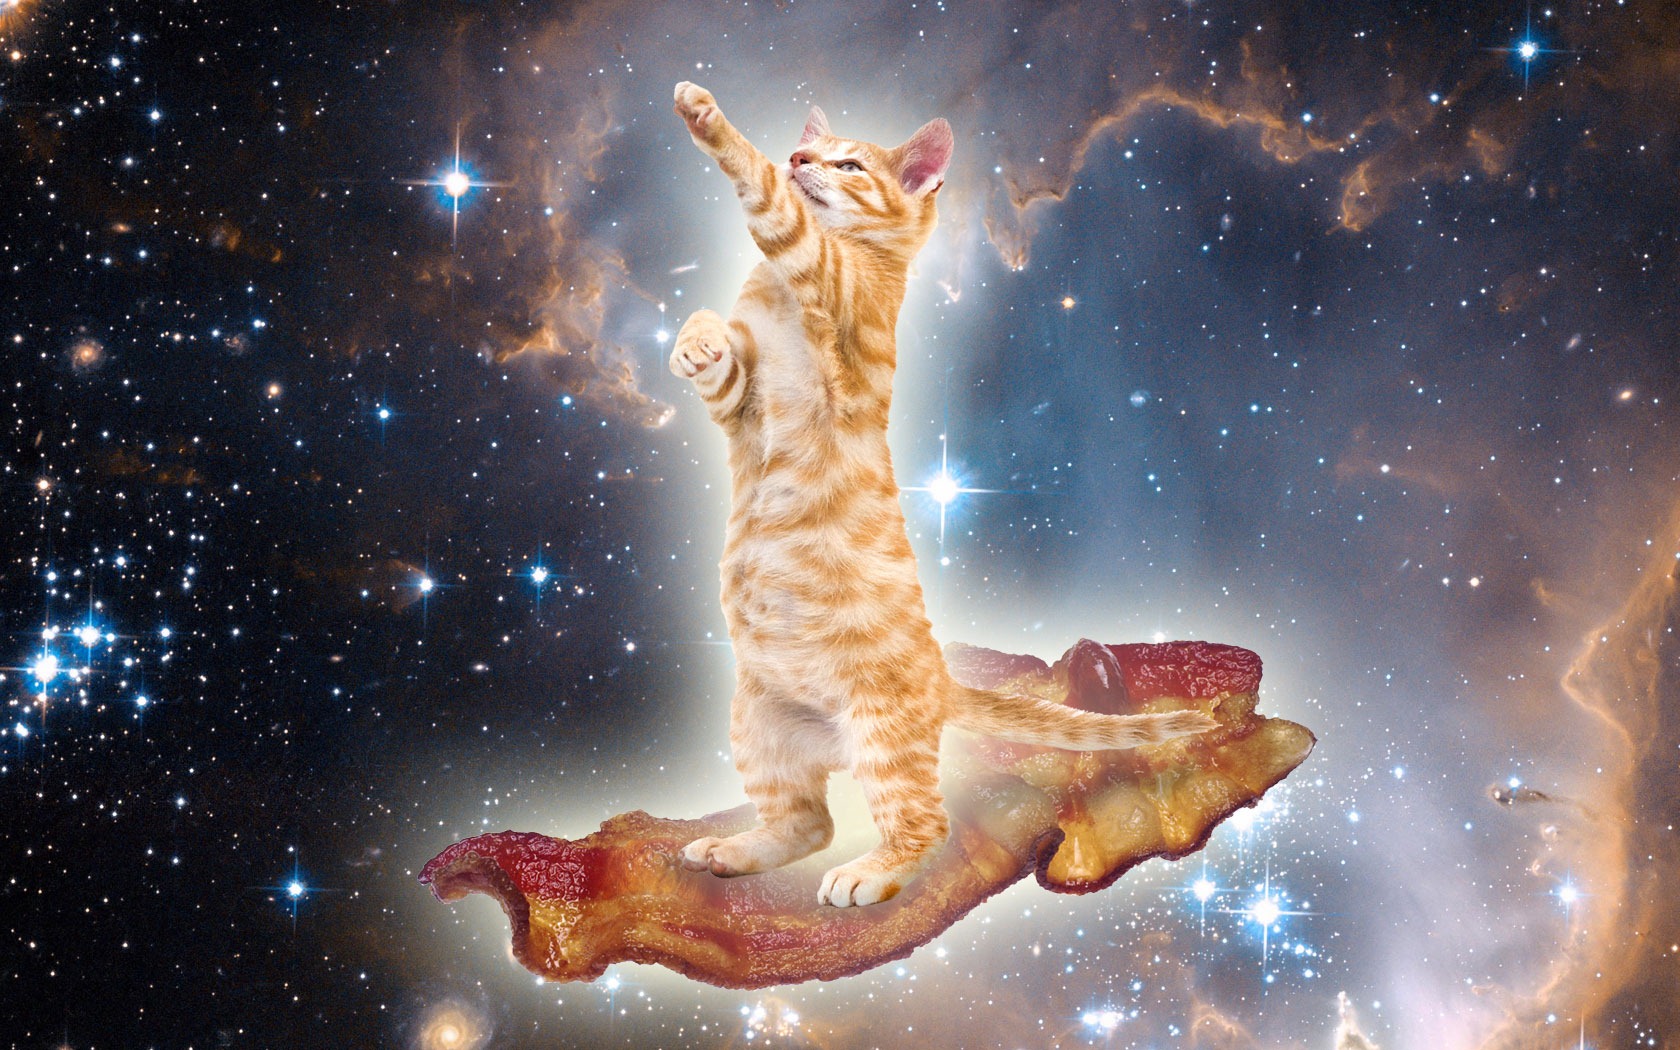 Space Bacon Kitty The Skinny On Cats